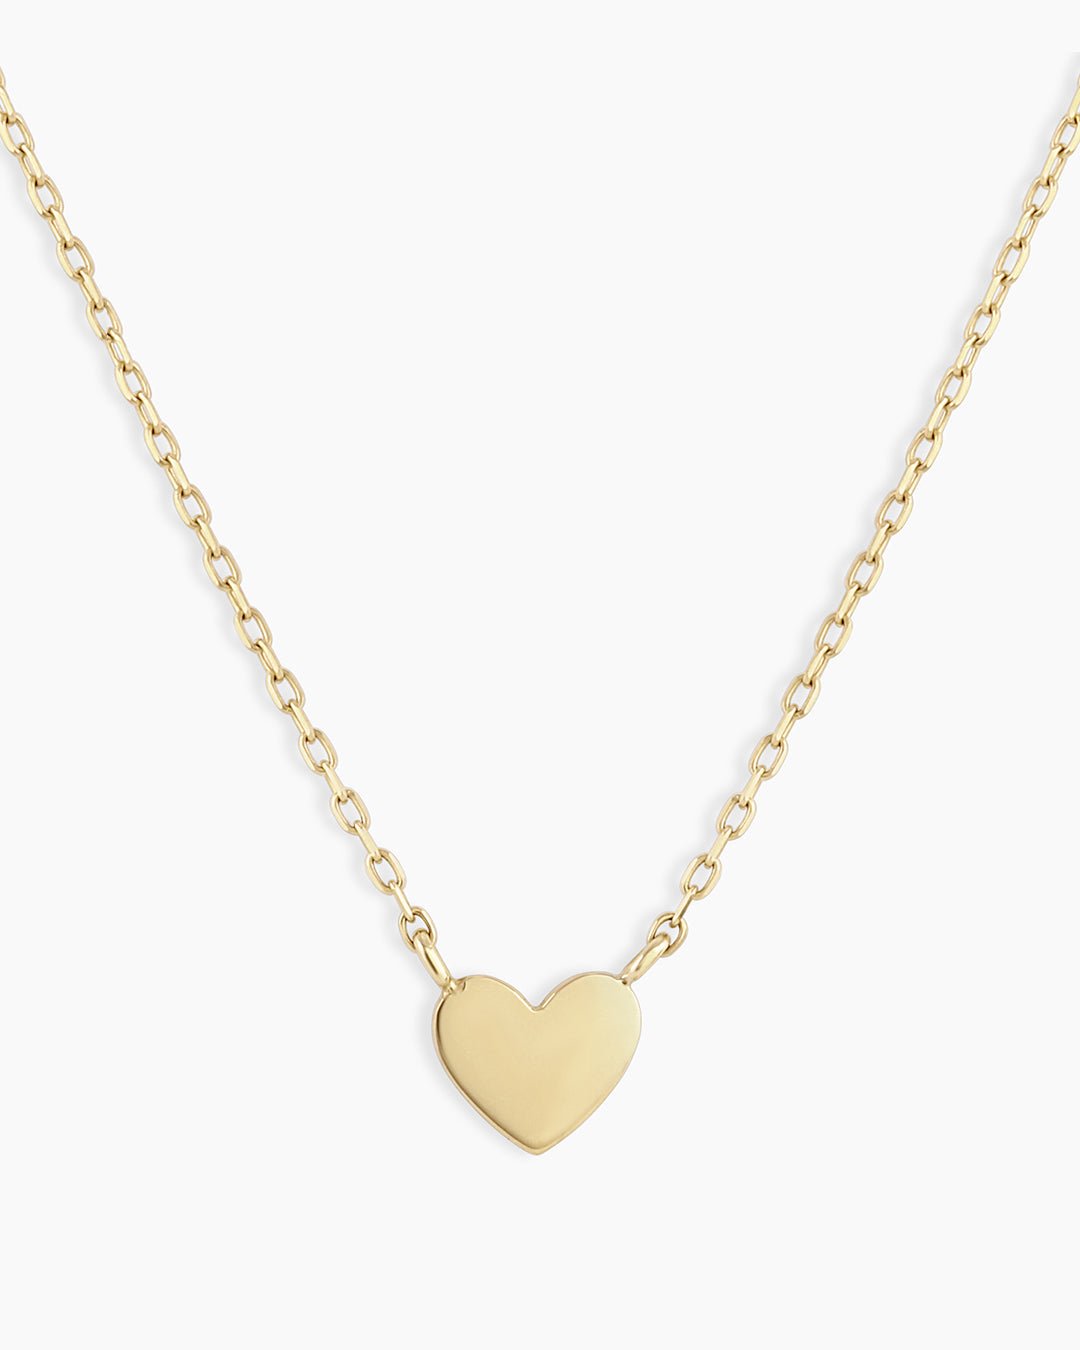 silver,golden Alloy Small Heart Necklace, Size: Adjustable at Rs